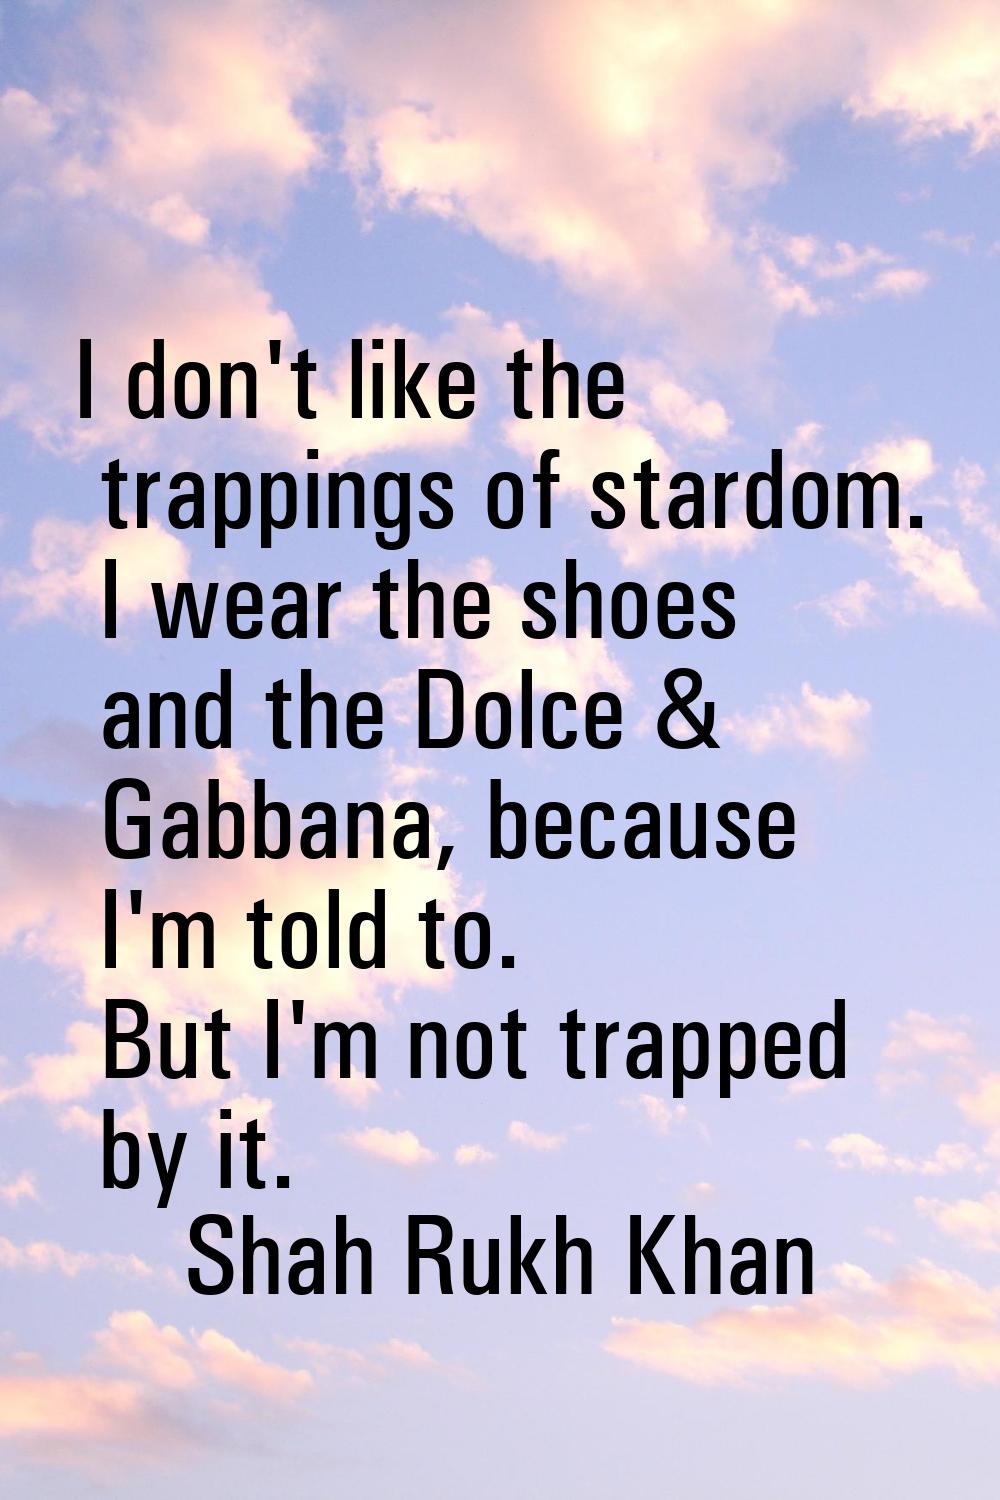 I don't like the trappings of stardom. I wear the shoes and the Dolce & Gabbana, because I'm told t